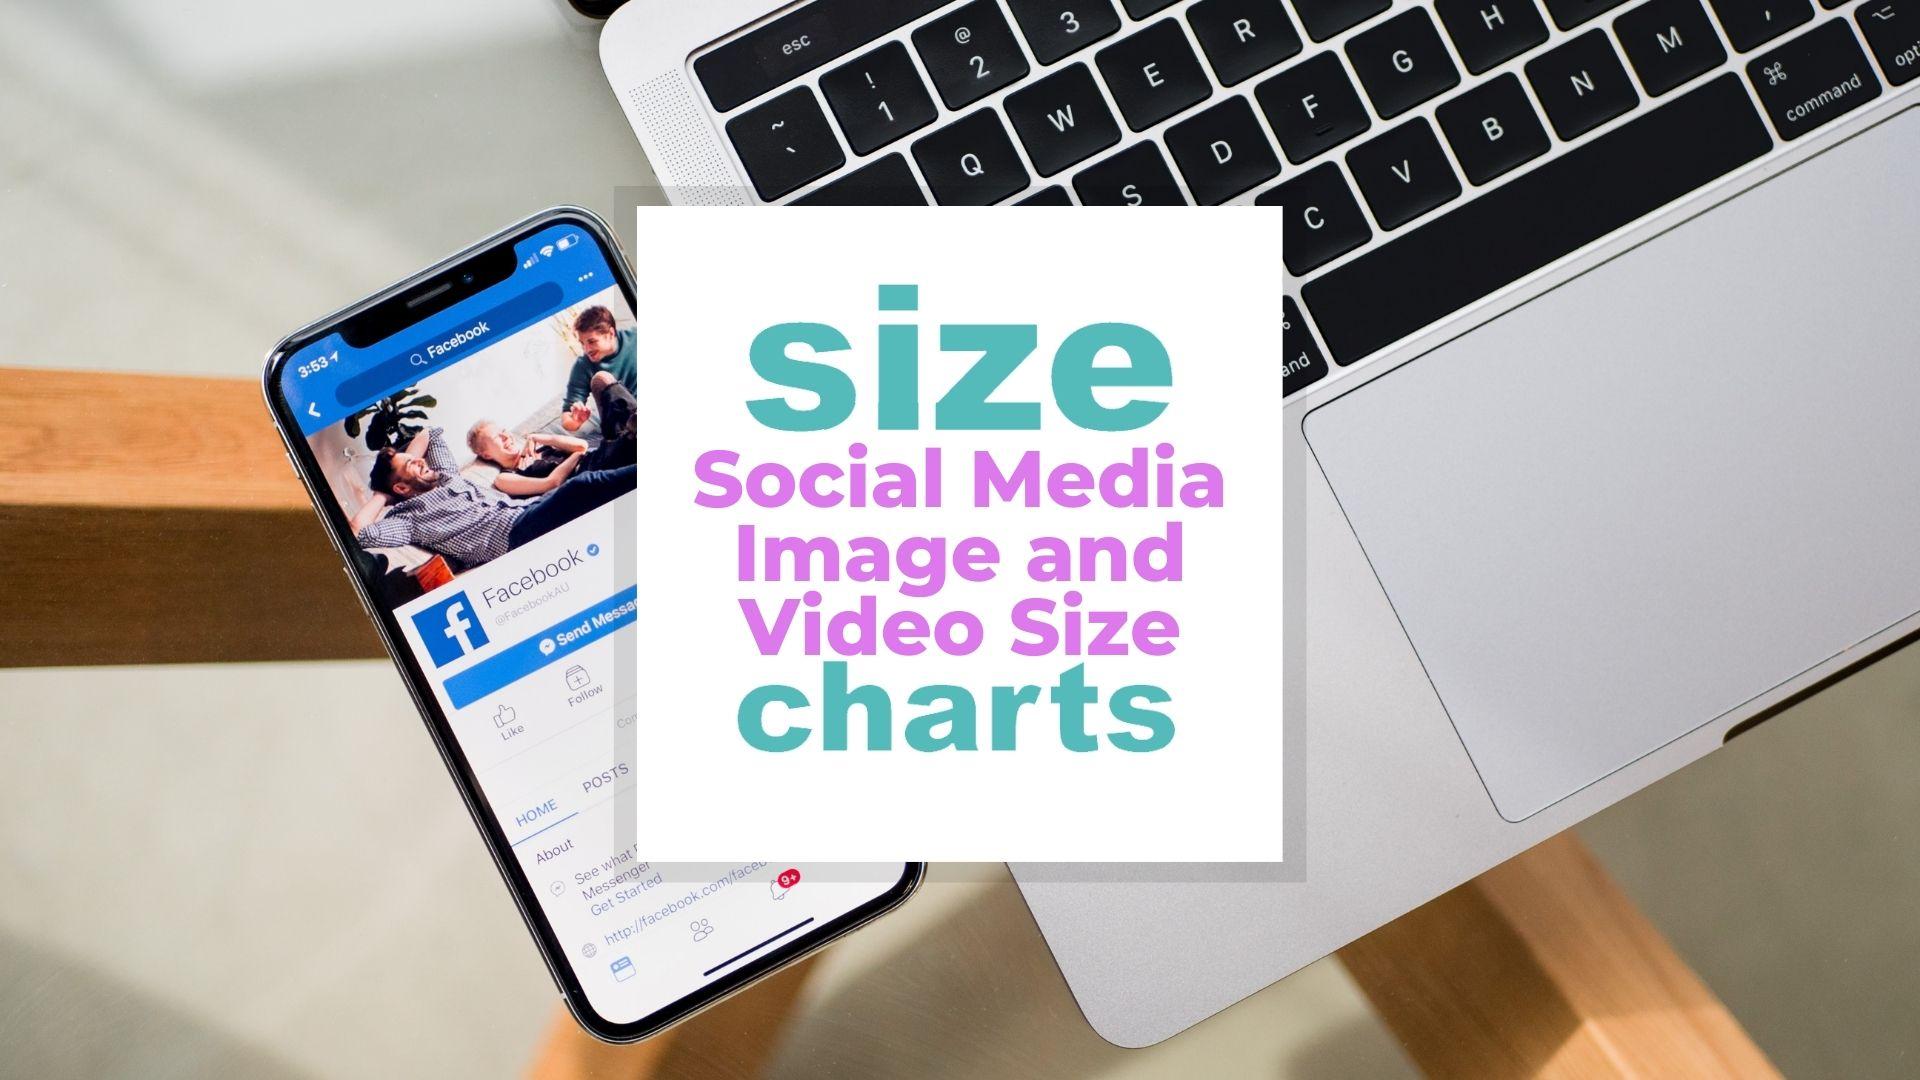 Social Media Image and Video Size by Social Platform Explained